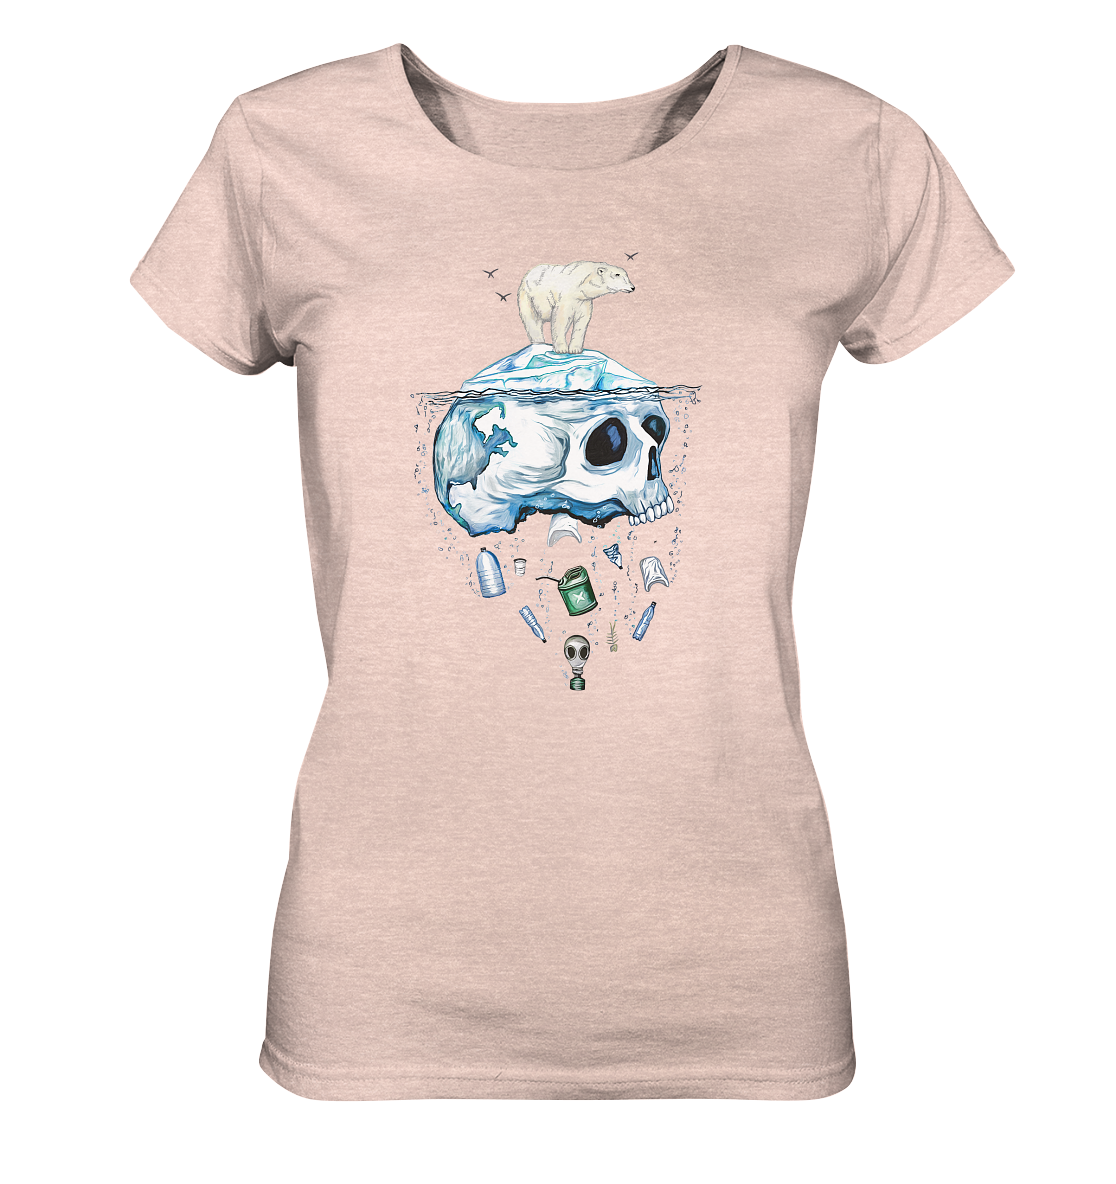 front-ladies-organic-shirt-meliert-ffded6-1116x.png